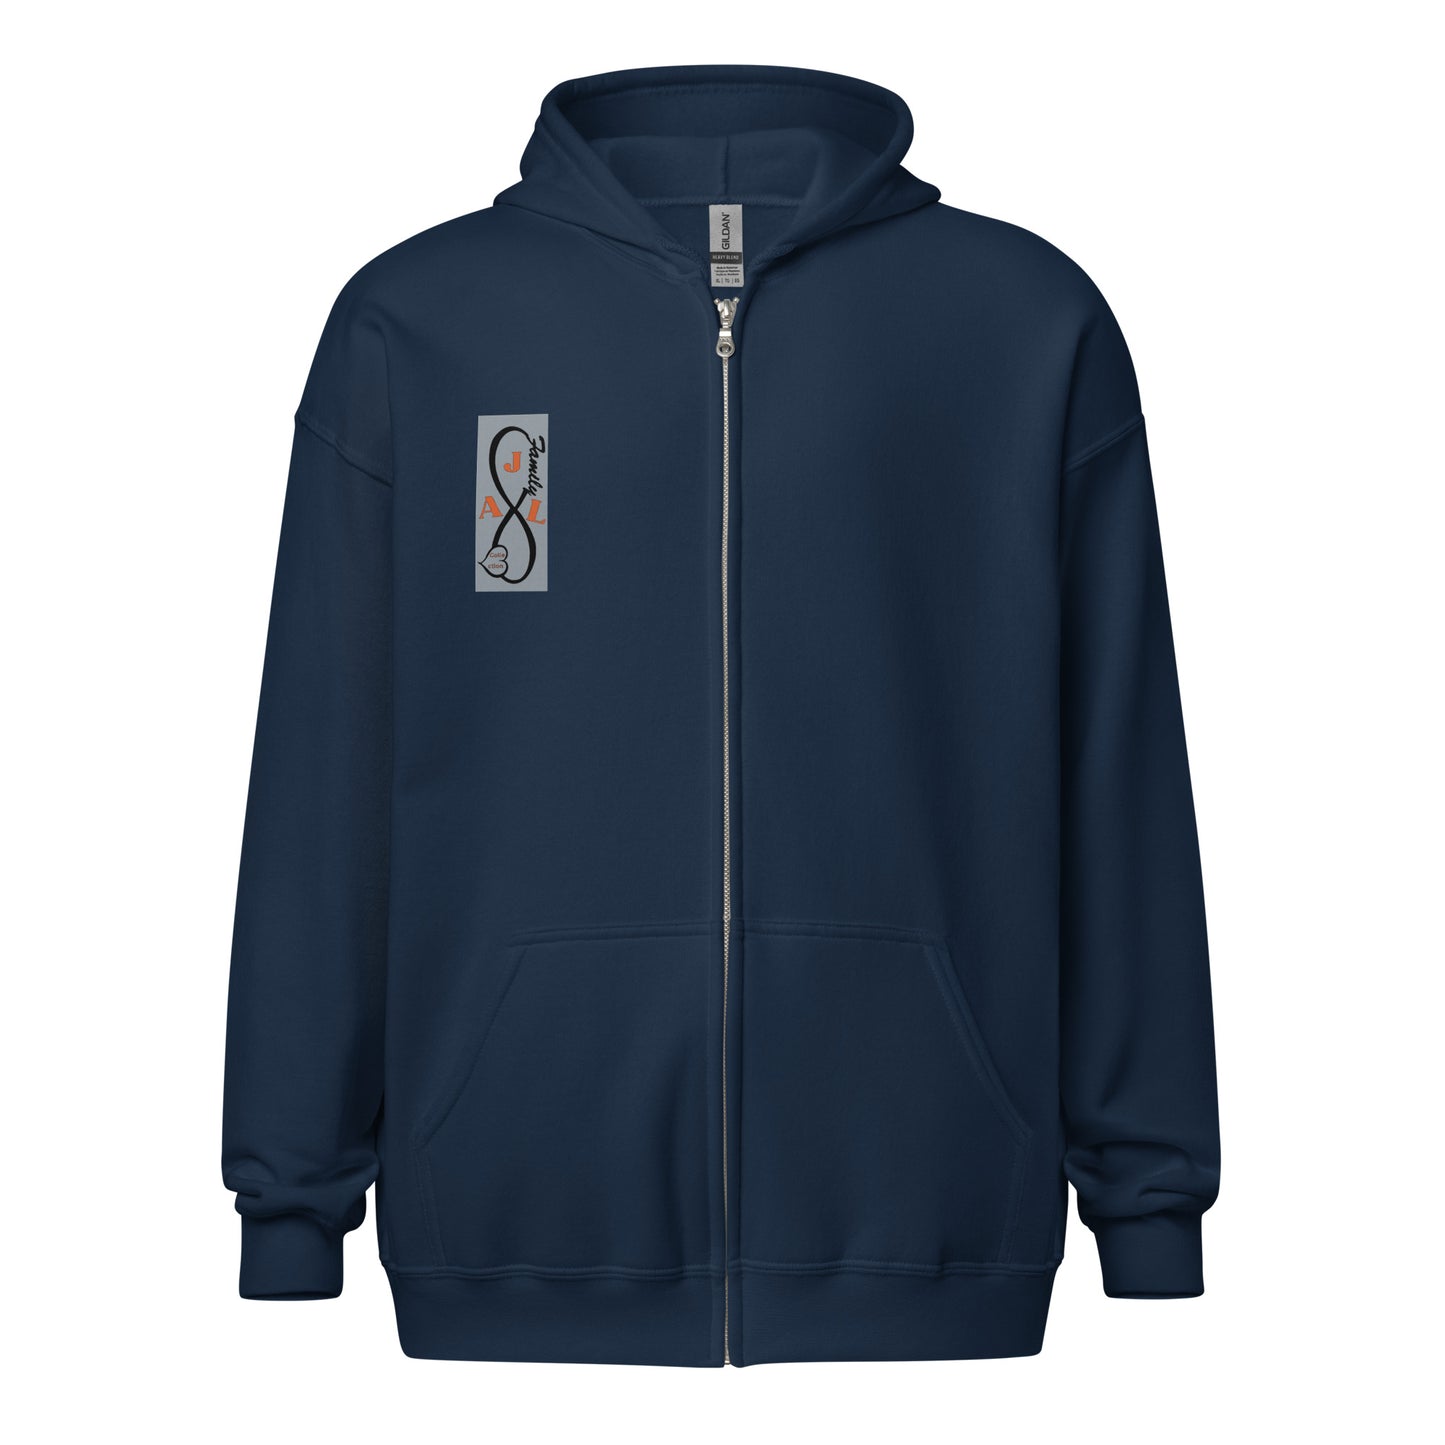 AJL Collection zip hoodie